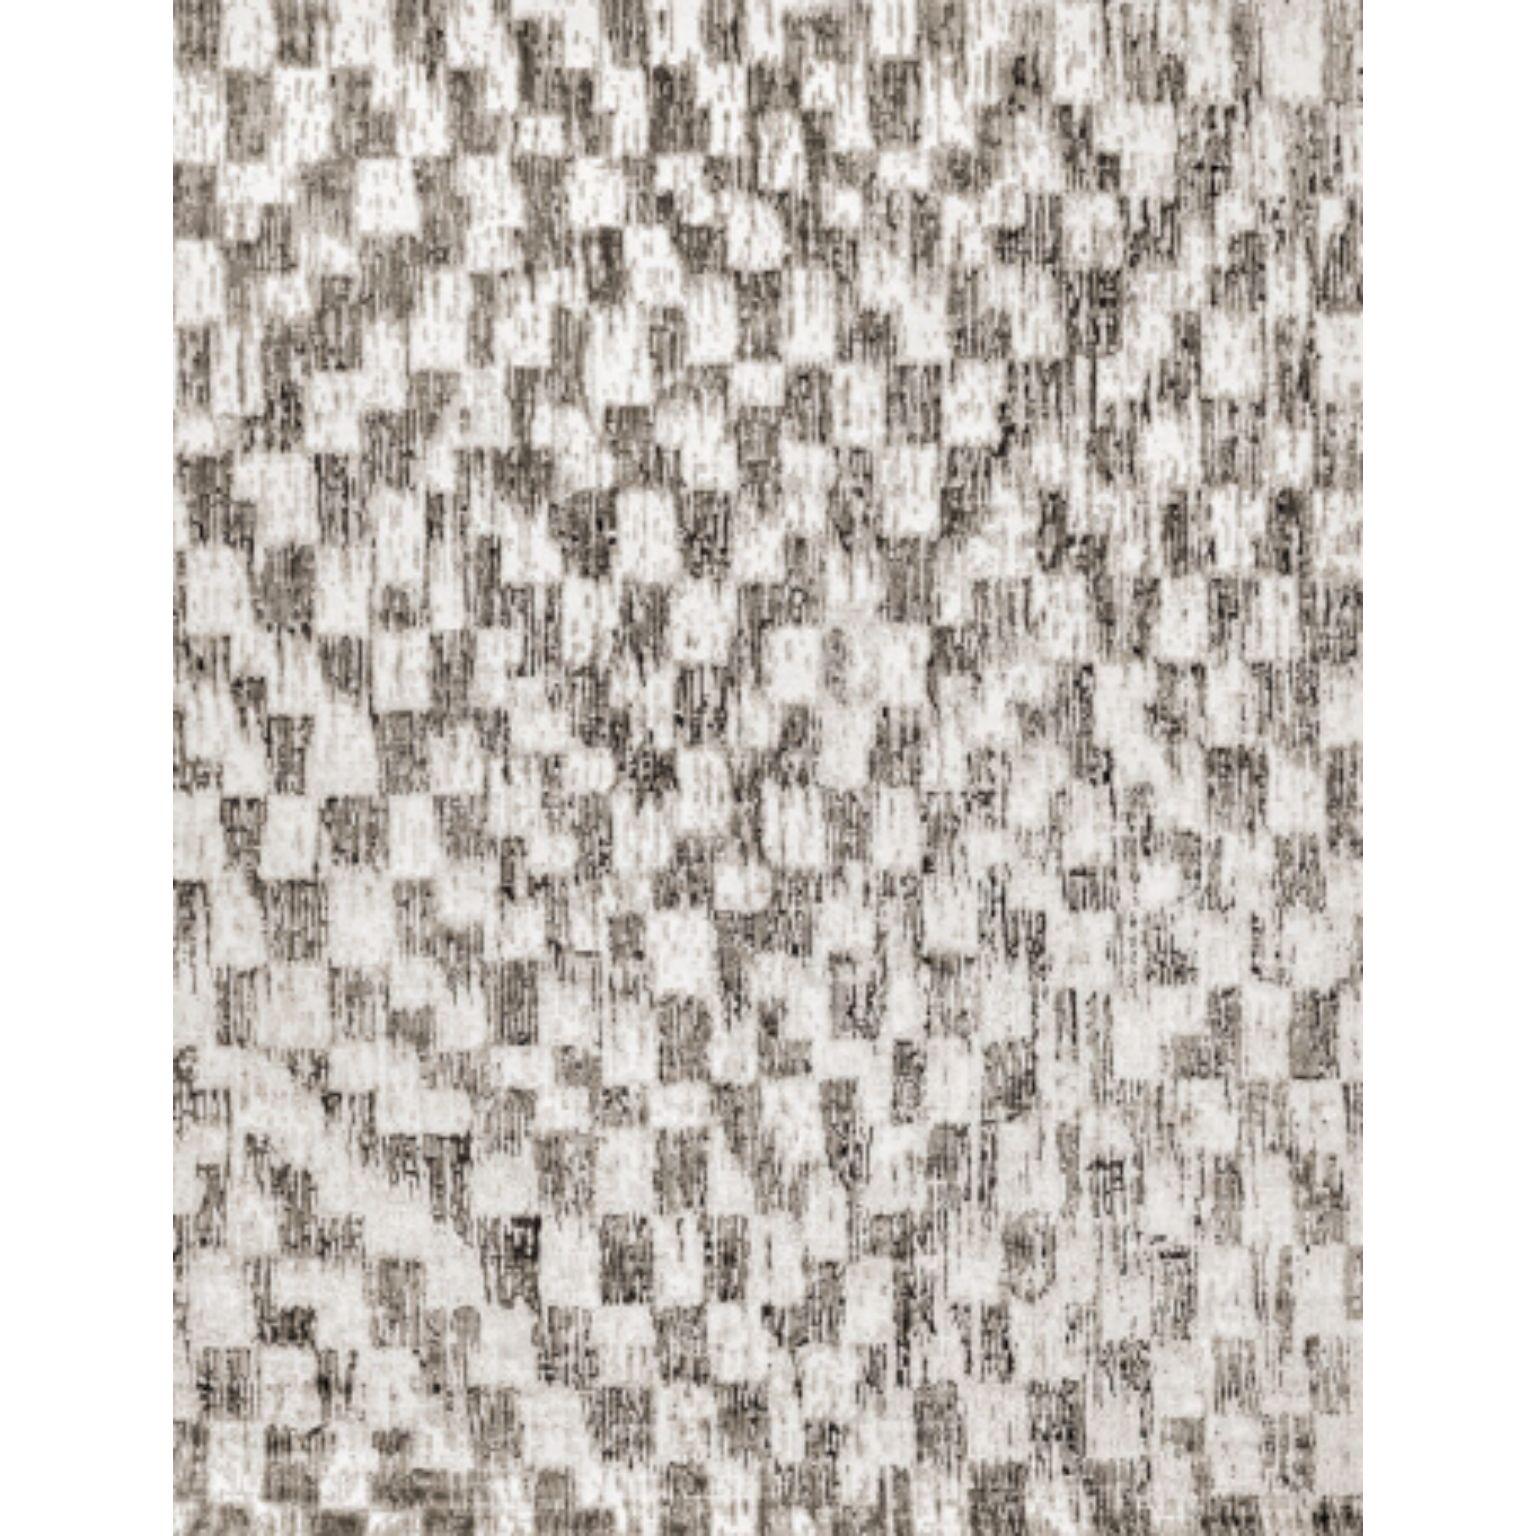 DAMIEN 200 rug by Illulian
Dimensions: D300 x H200 cm 
Materials: Wool 50%, Silk 50%
Variations available and prices may vary according to materials and sizes.

Illulian, historic and prestigious rug company brand, internationally renowned in